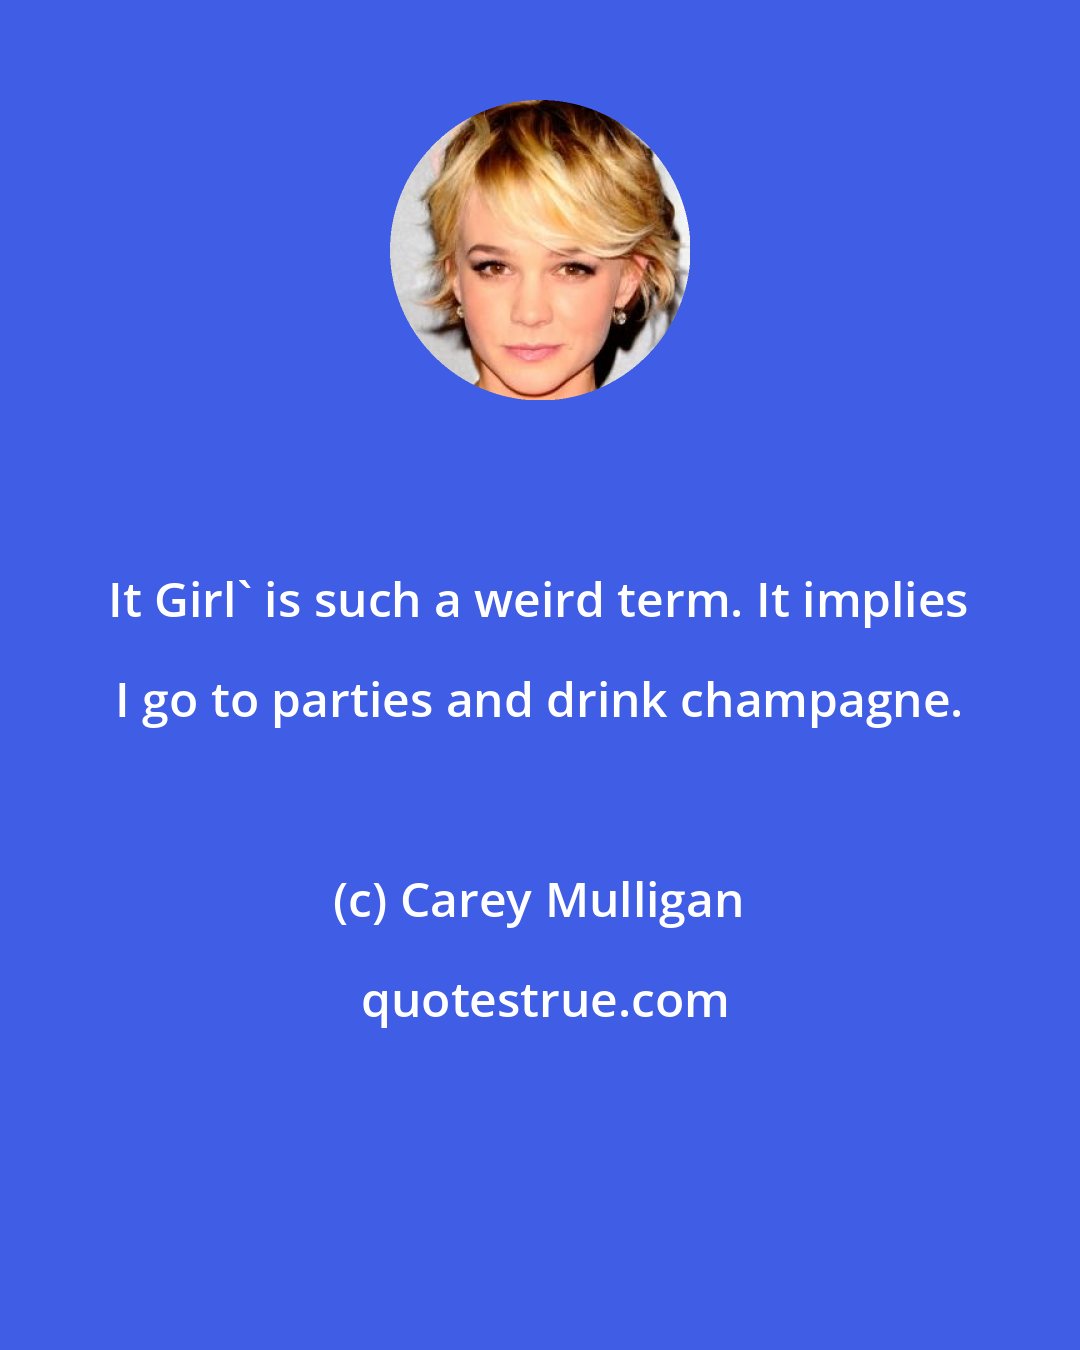 Carey Mulligan: It Girl' is such a weird term. It implies I go to parties and drink champagne.